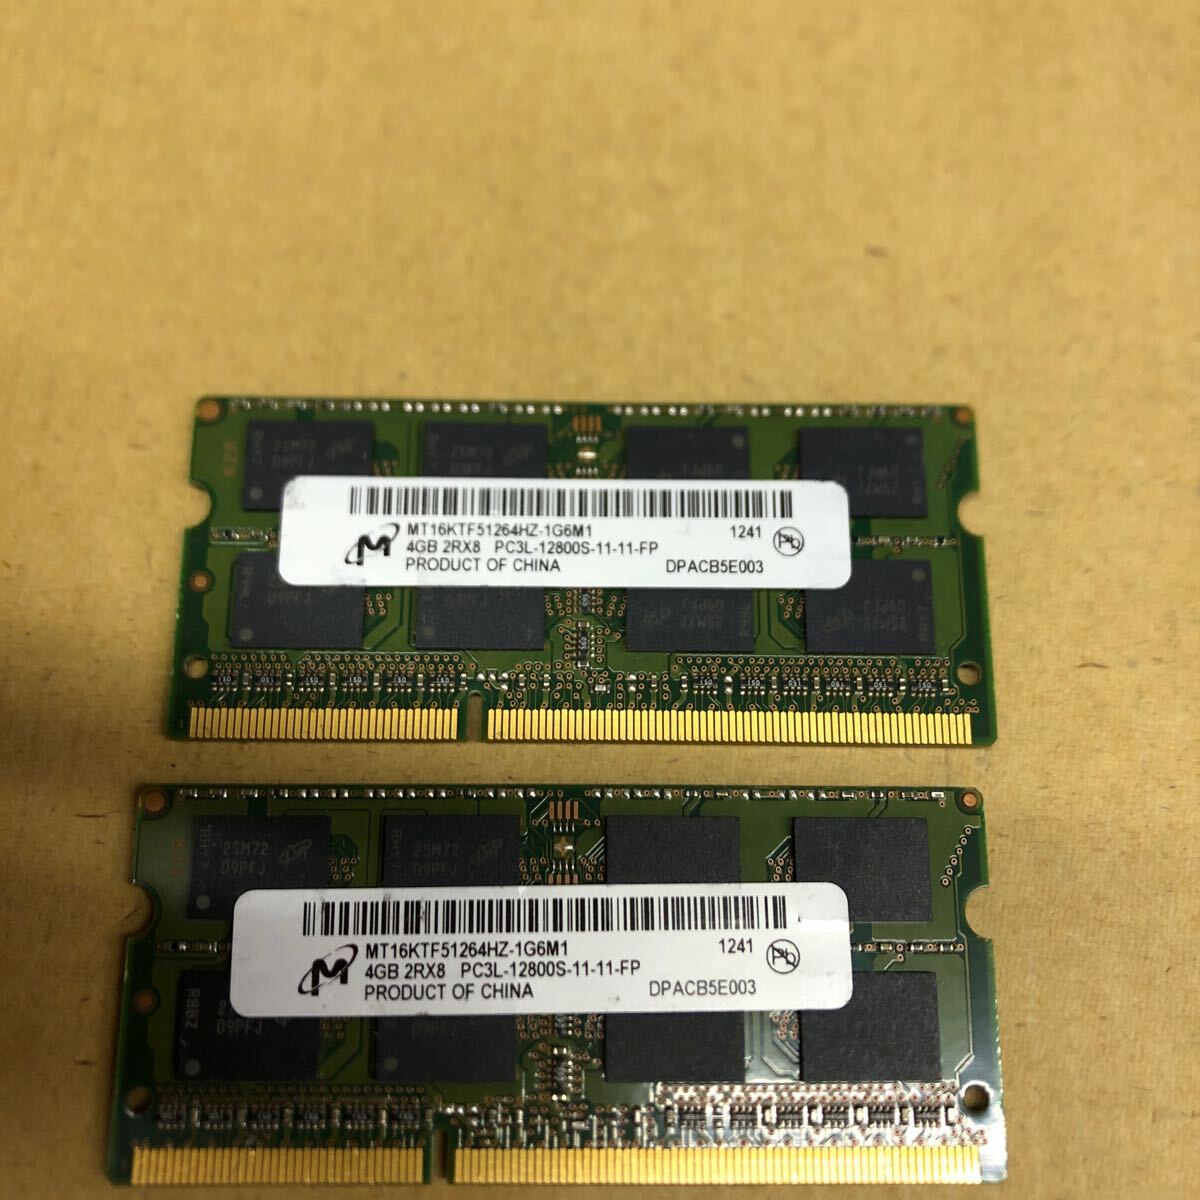 Micron Technology made PC3L-12800S 2Rx8 4GB Note PC for memory 4GB×2 sheets set =8GB @-2